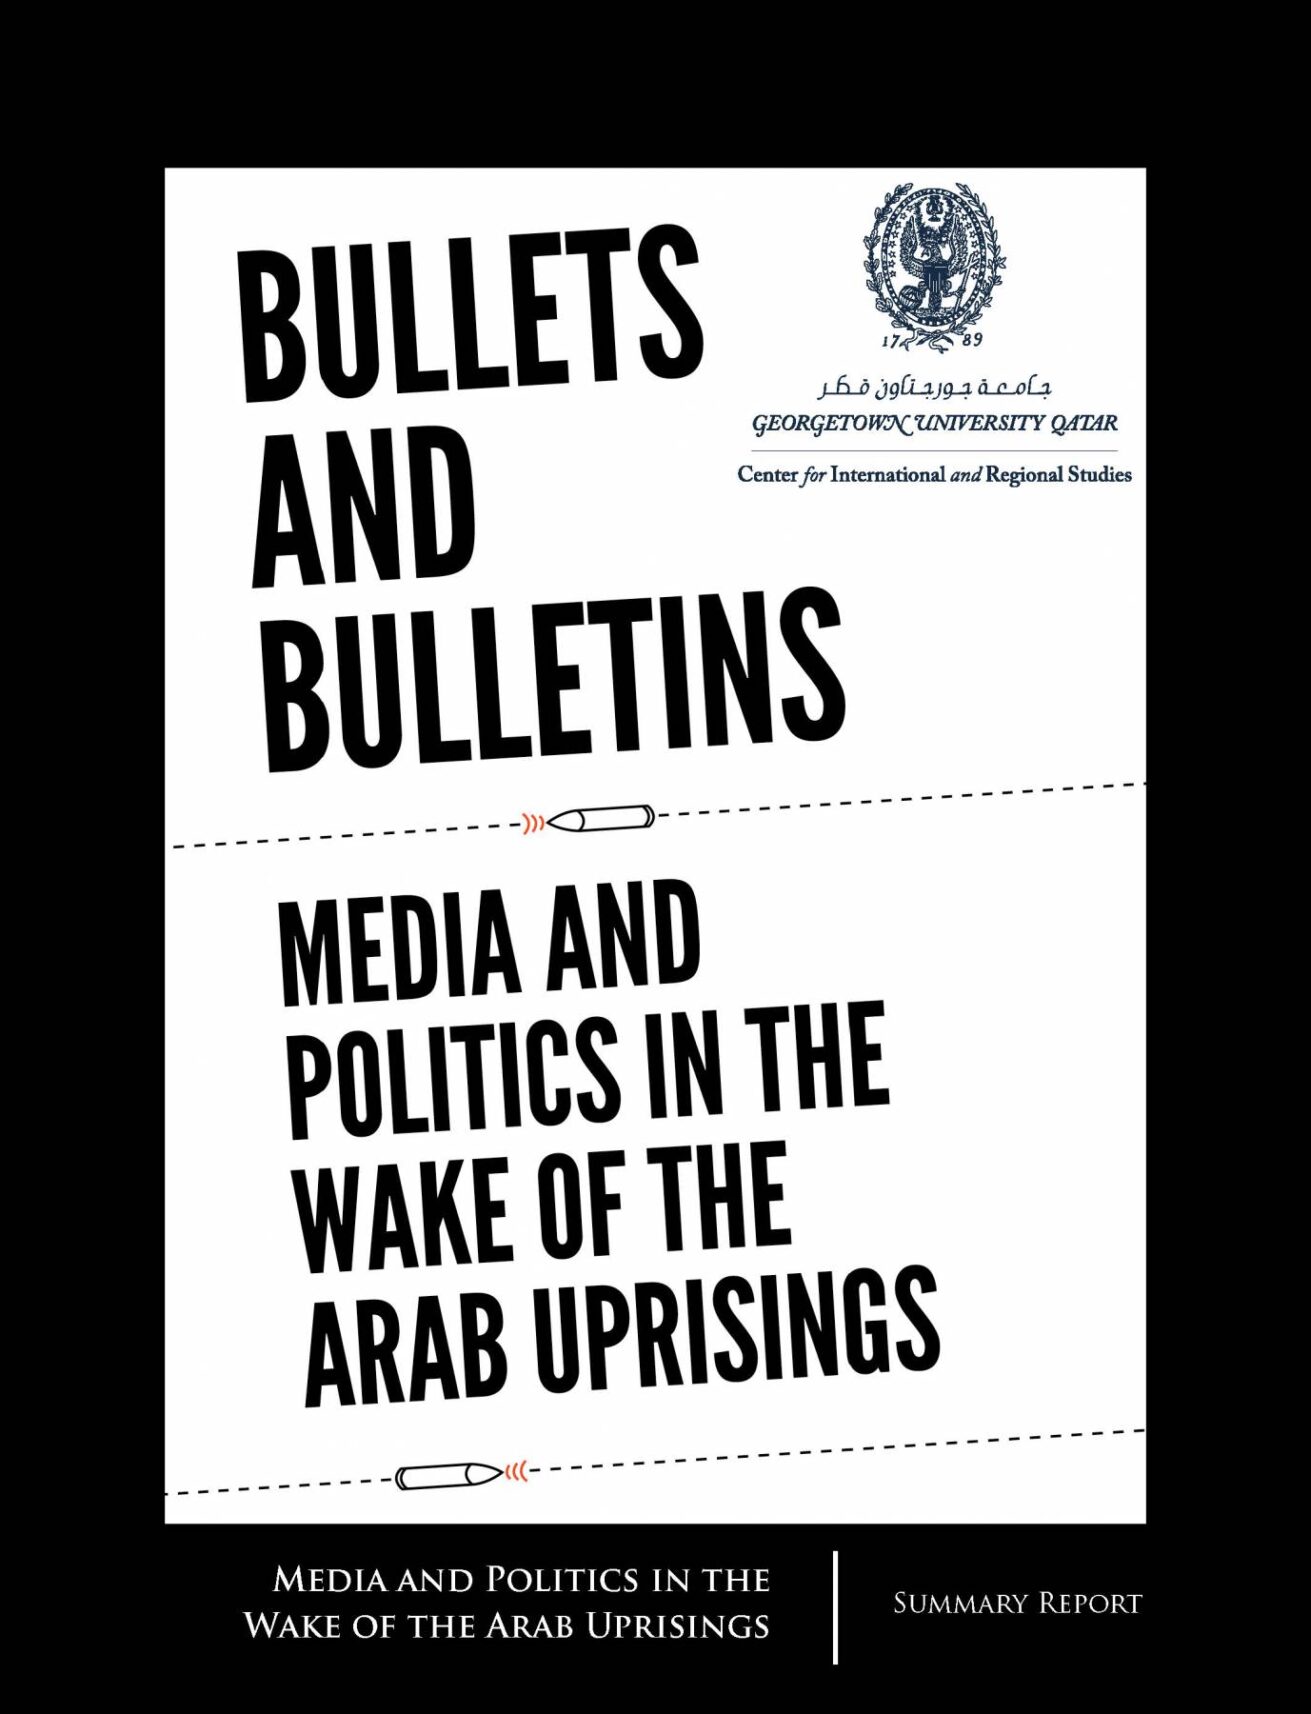 Media and Politics in the Wake of the Arab Uprisings